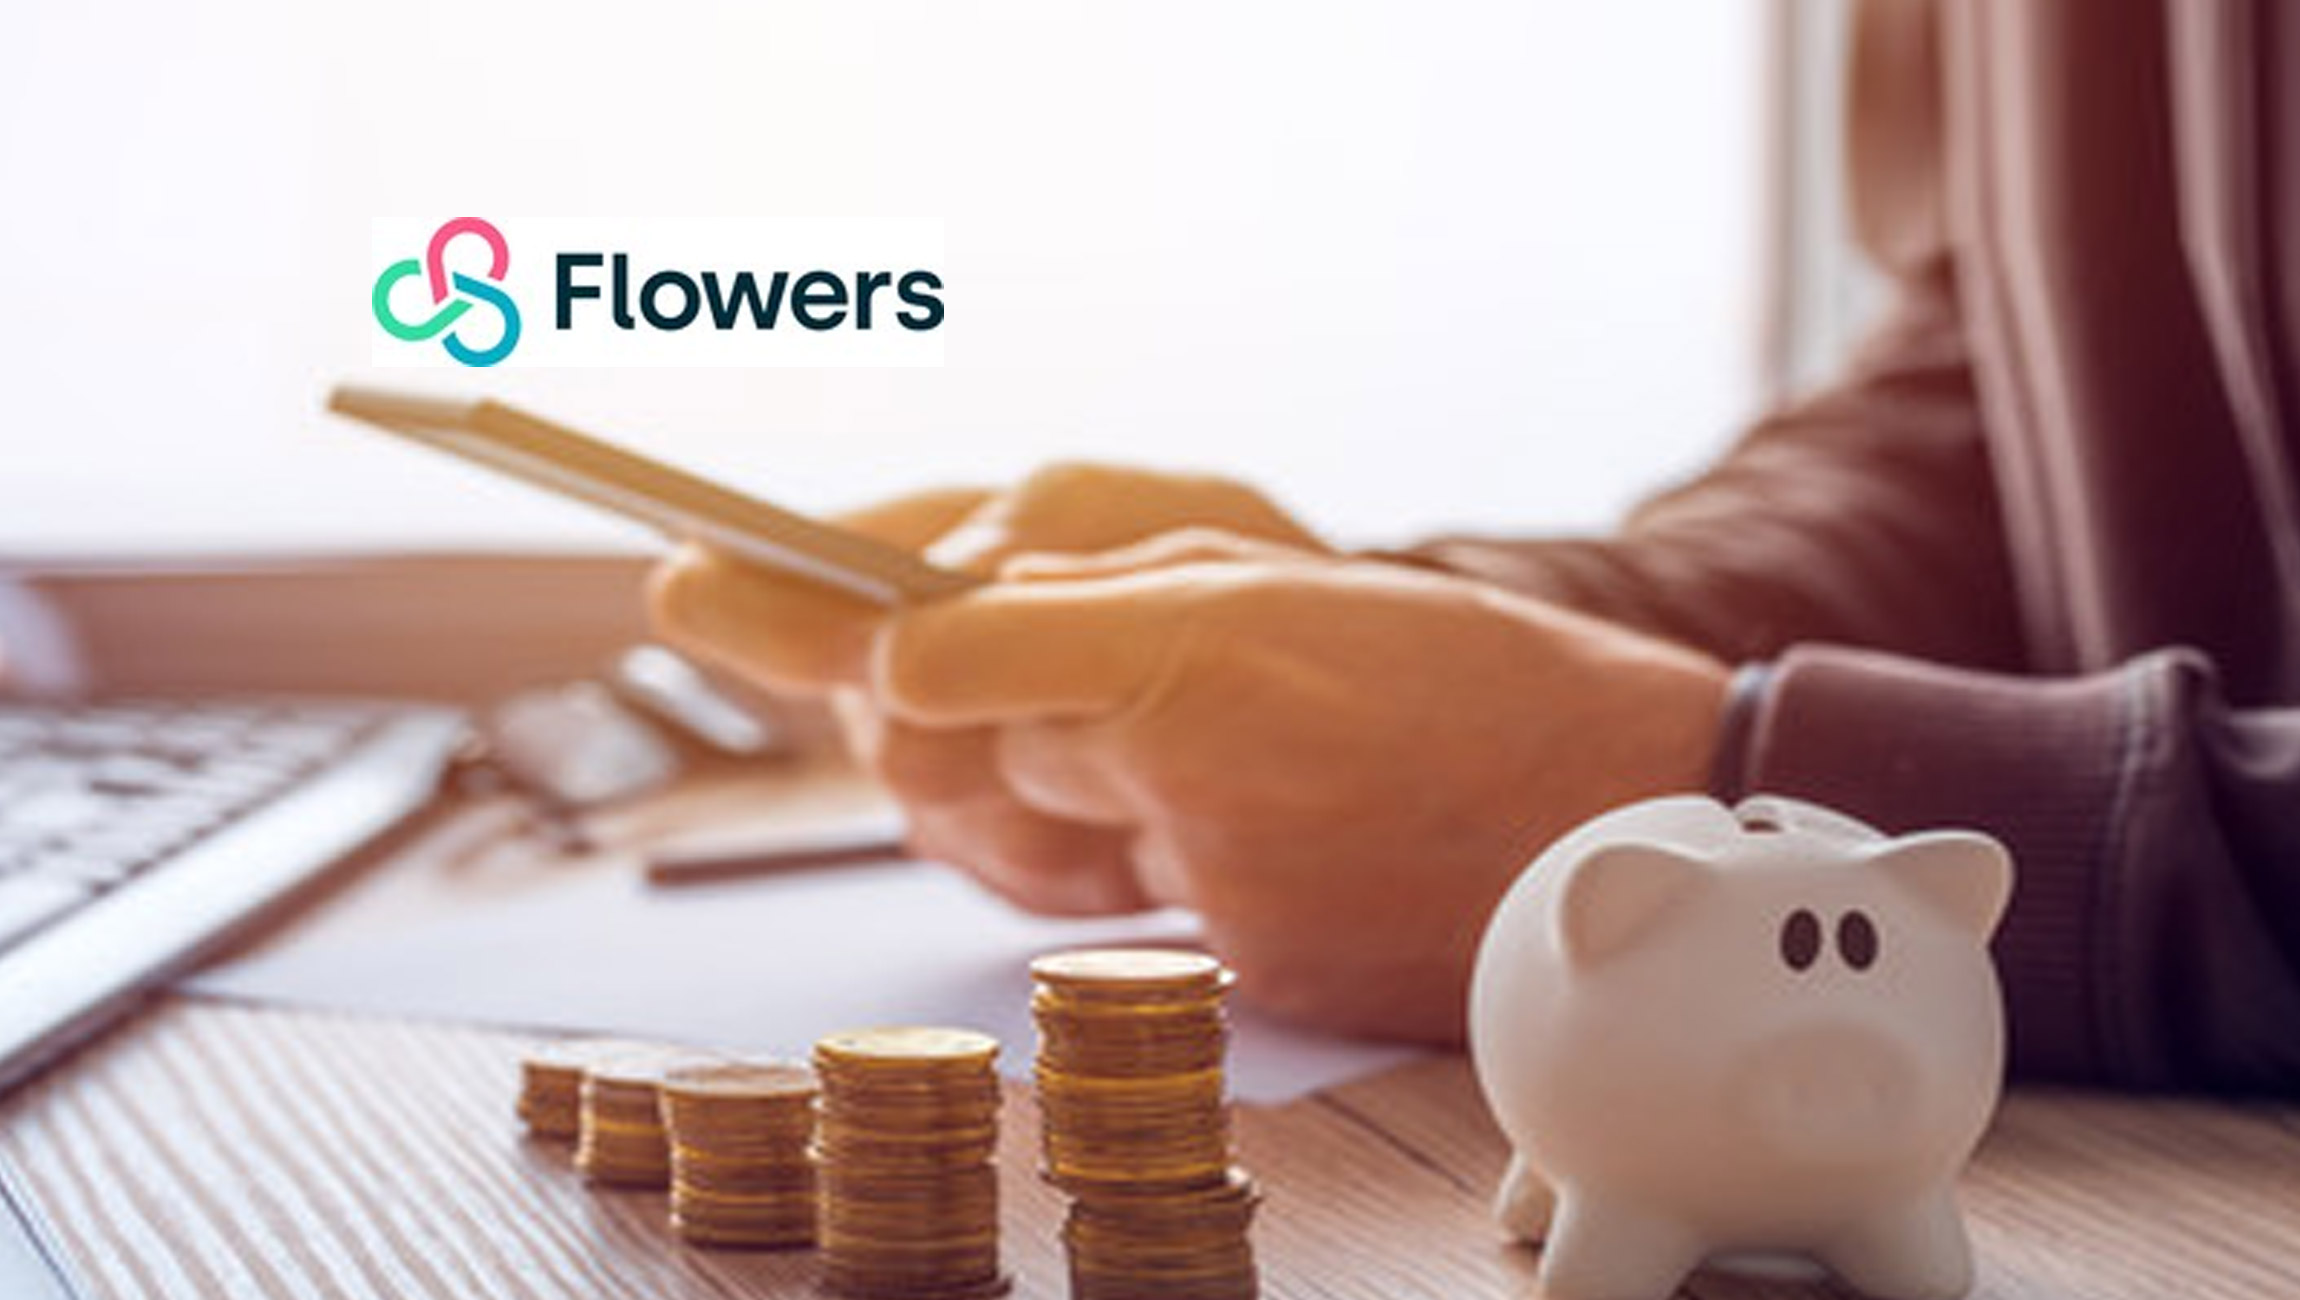 Flowers Software Secures $3.2 Million in Seed to Bring Enterprise-Grade Workflow Automation to SMBs